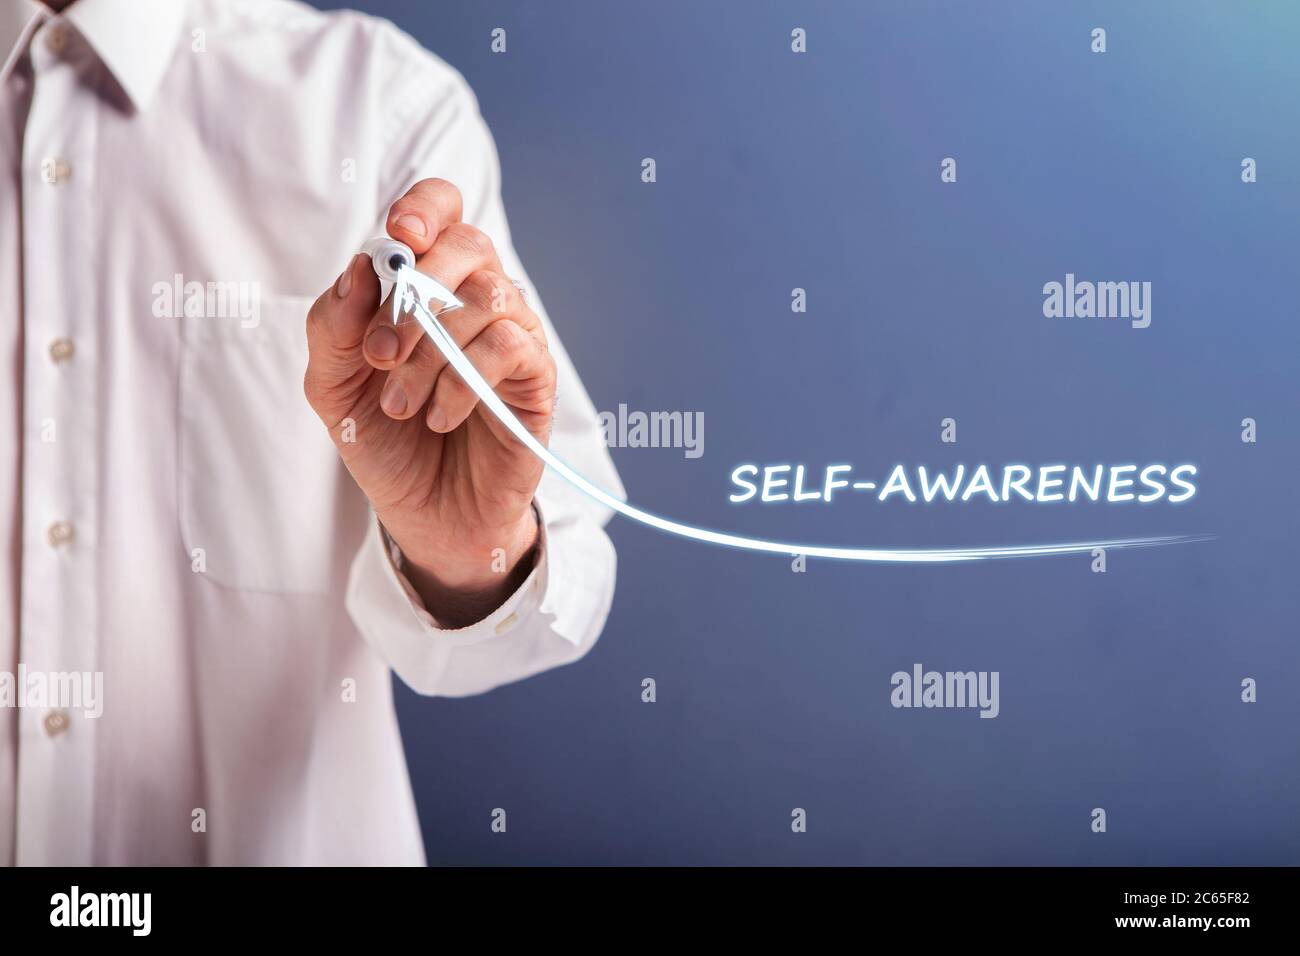 Businessman Drawing Arrow Up Symbolizing Self Awareness, Gray Background, Collage Stock Photo